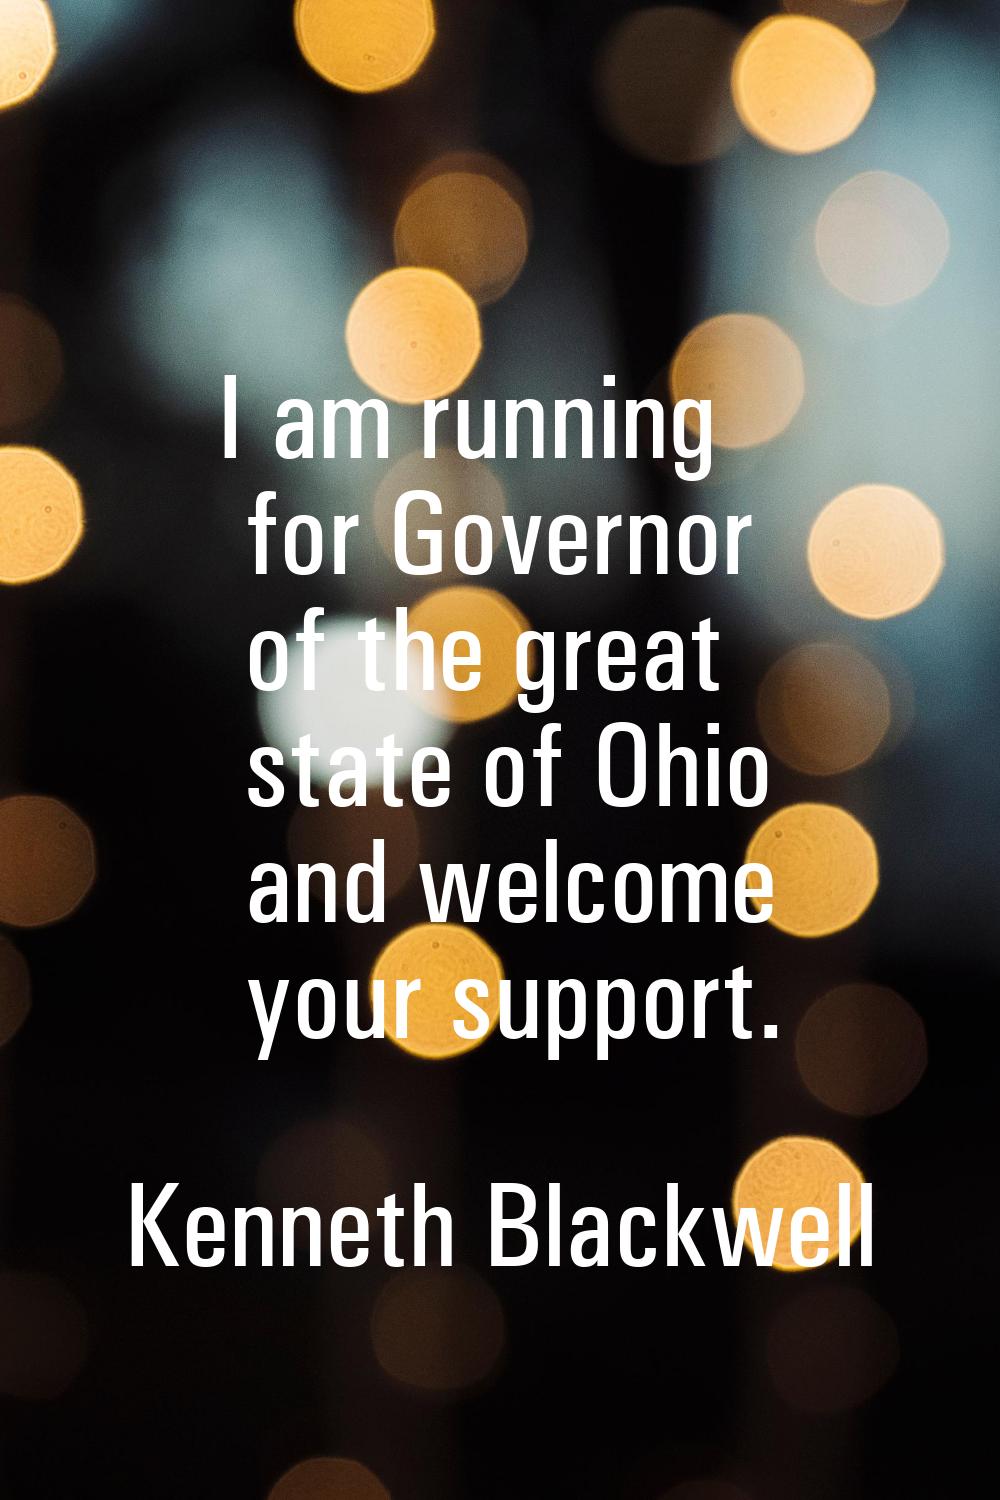 I am running for Governor of the great state of Ohio and welcome your support.